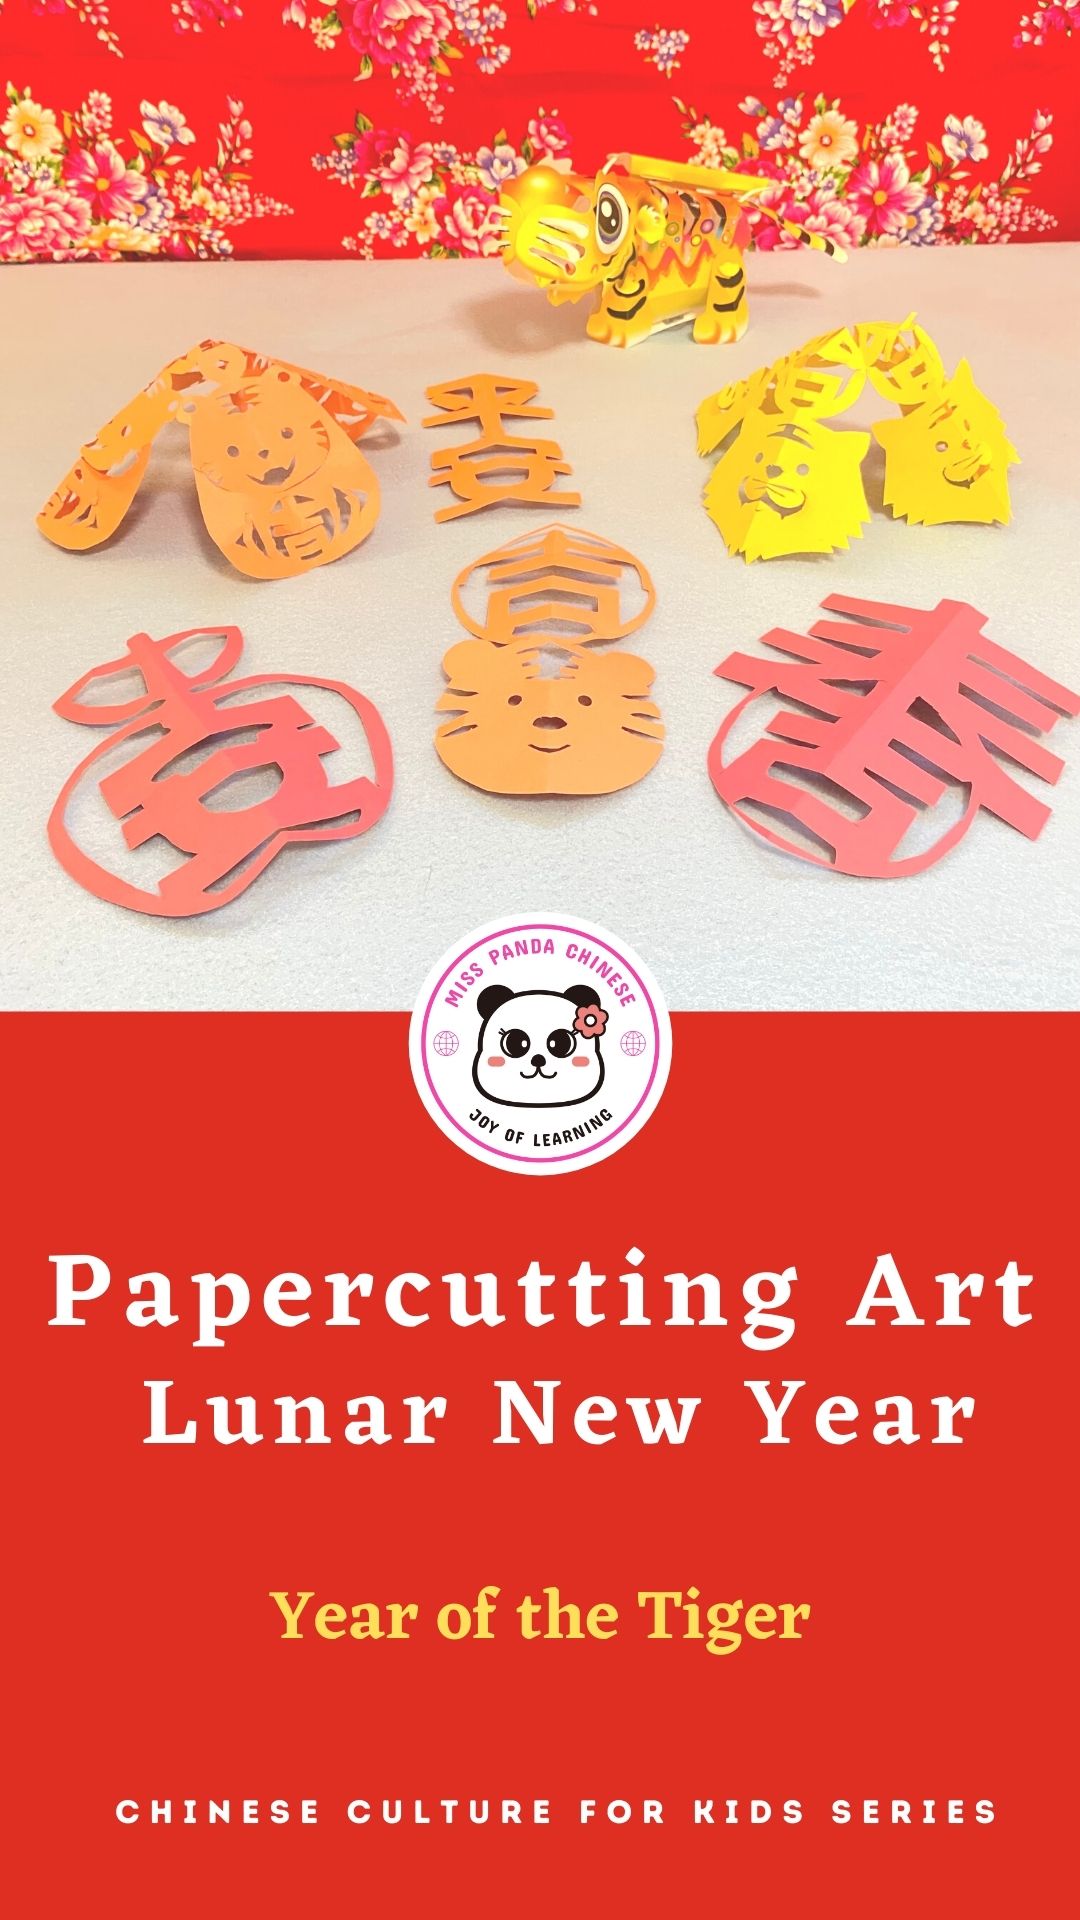 papercutting template Year of the Tiger | MissPandaChinese.com